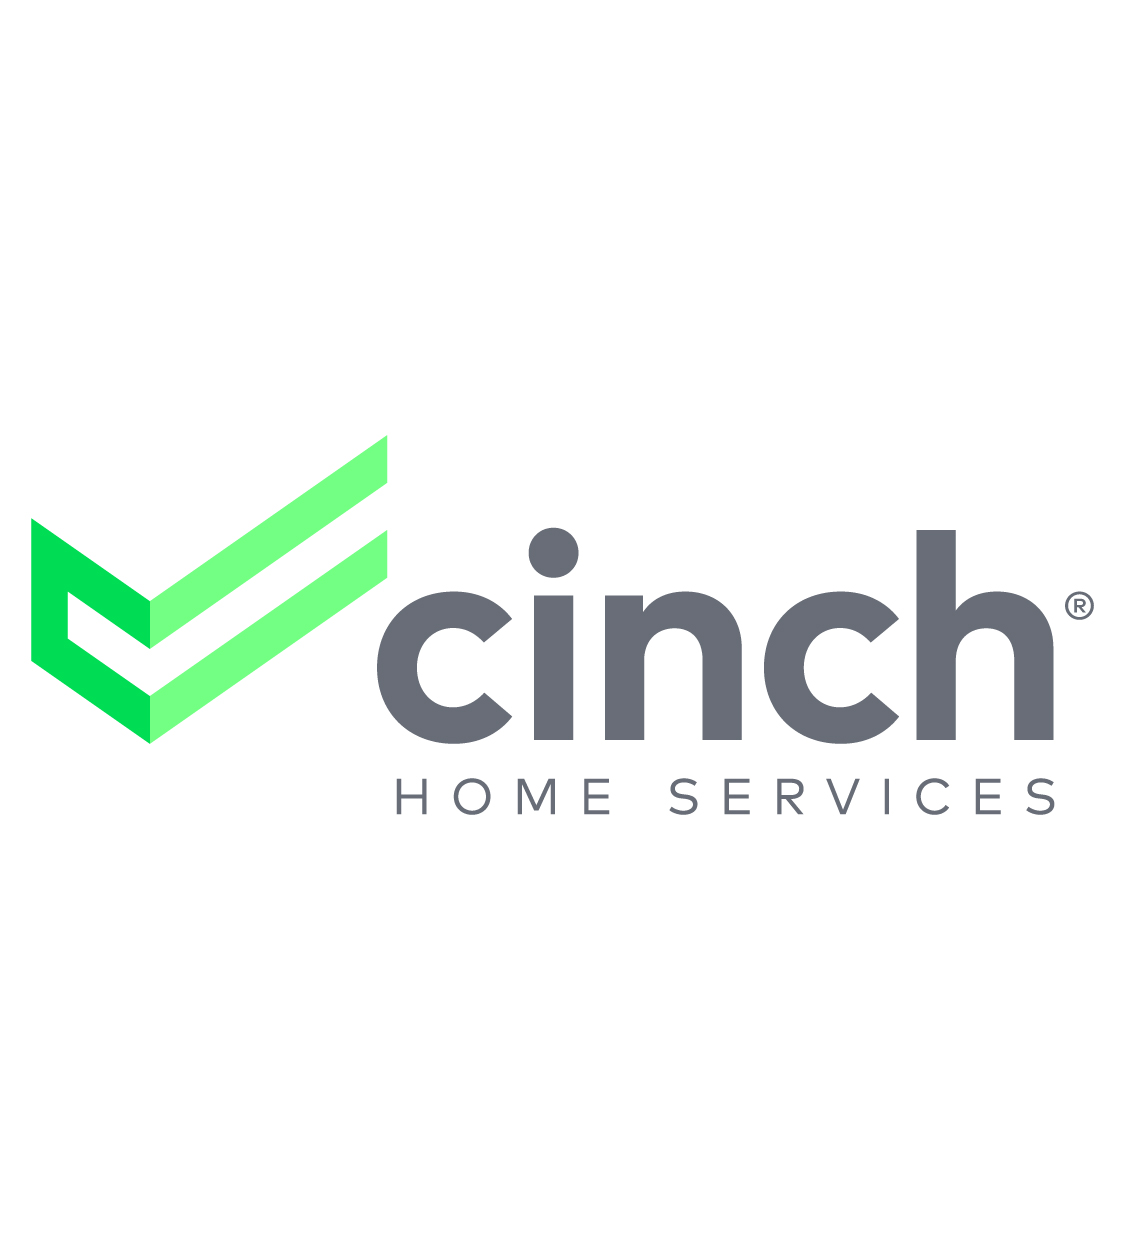 Cinch® Home Services partners with The Zebra company